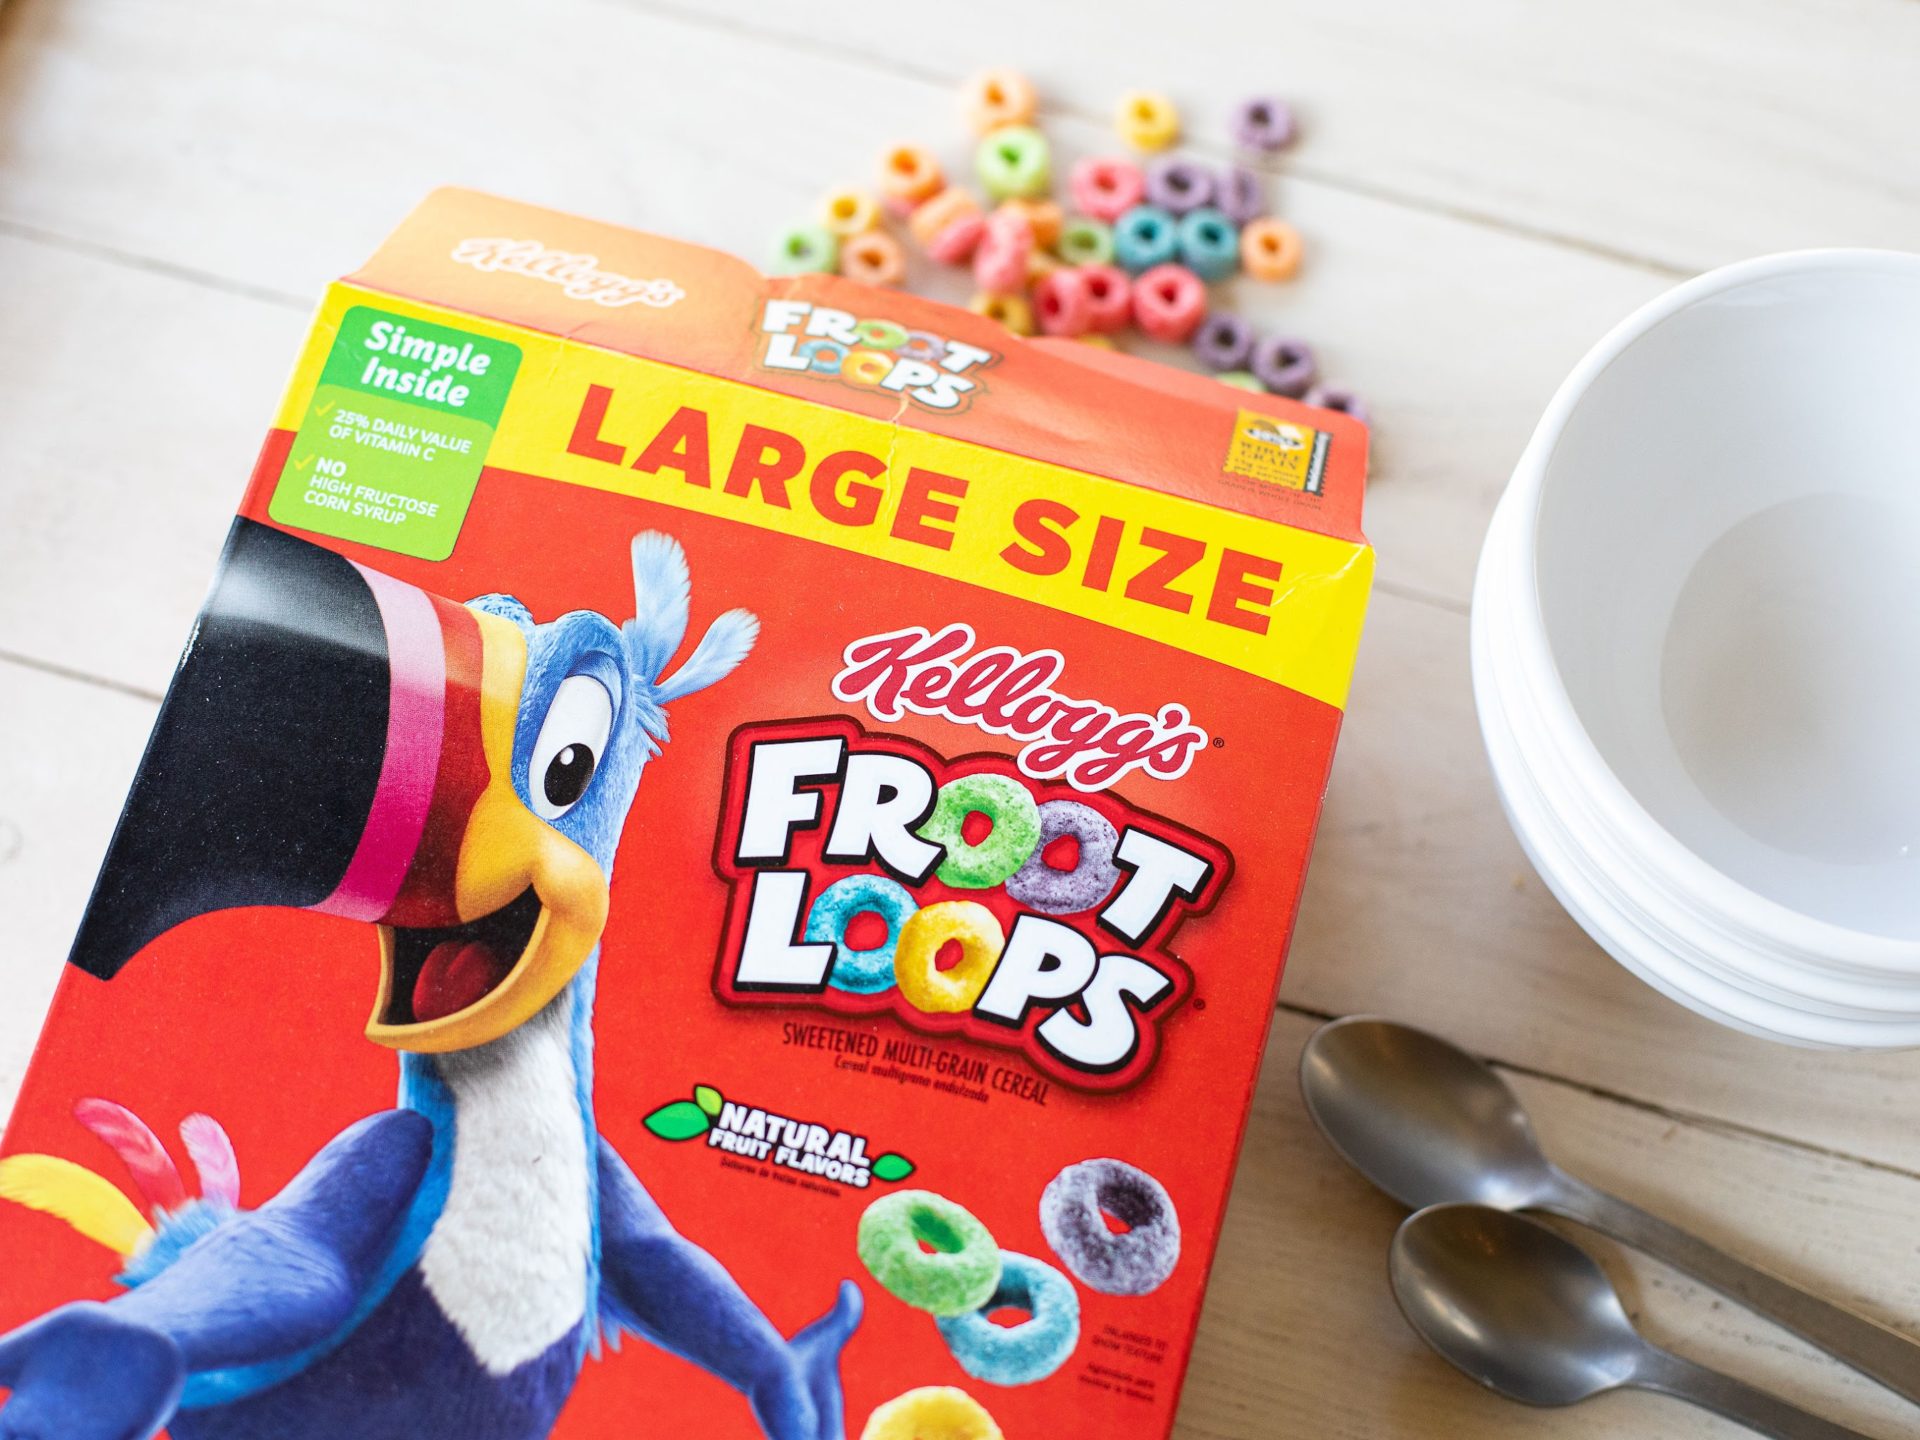 Kellogg’s Large Size Boxes Of Cereal As Low As $1.79 At Kroger